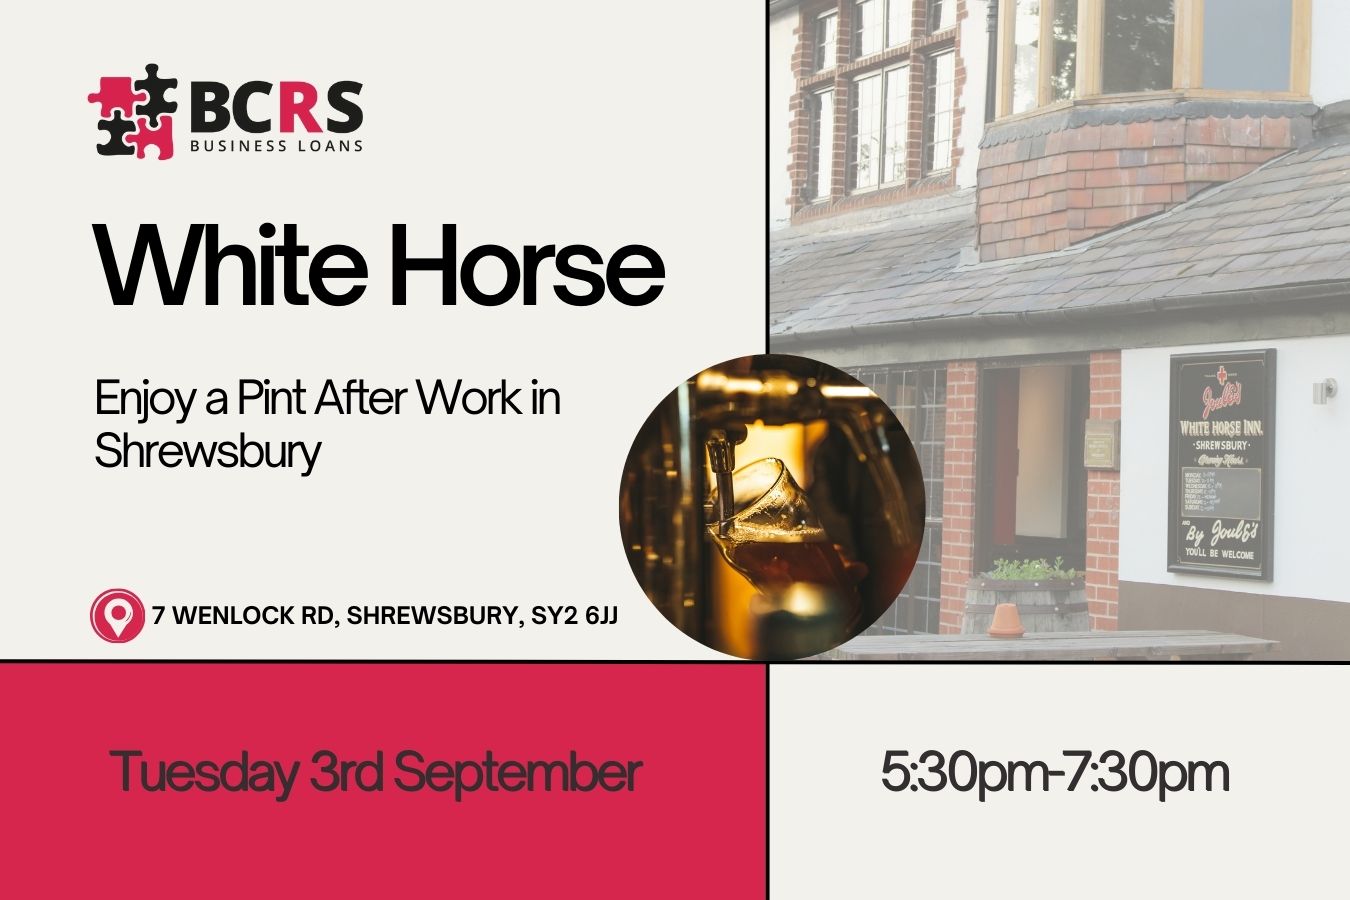 Pint After Work networking event returns to Shrewsbury